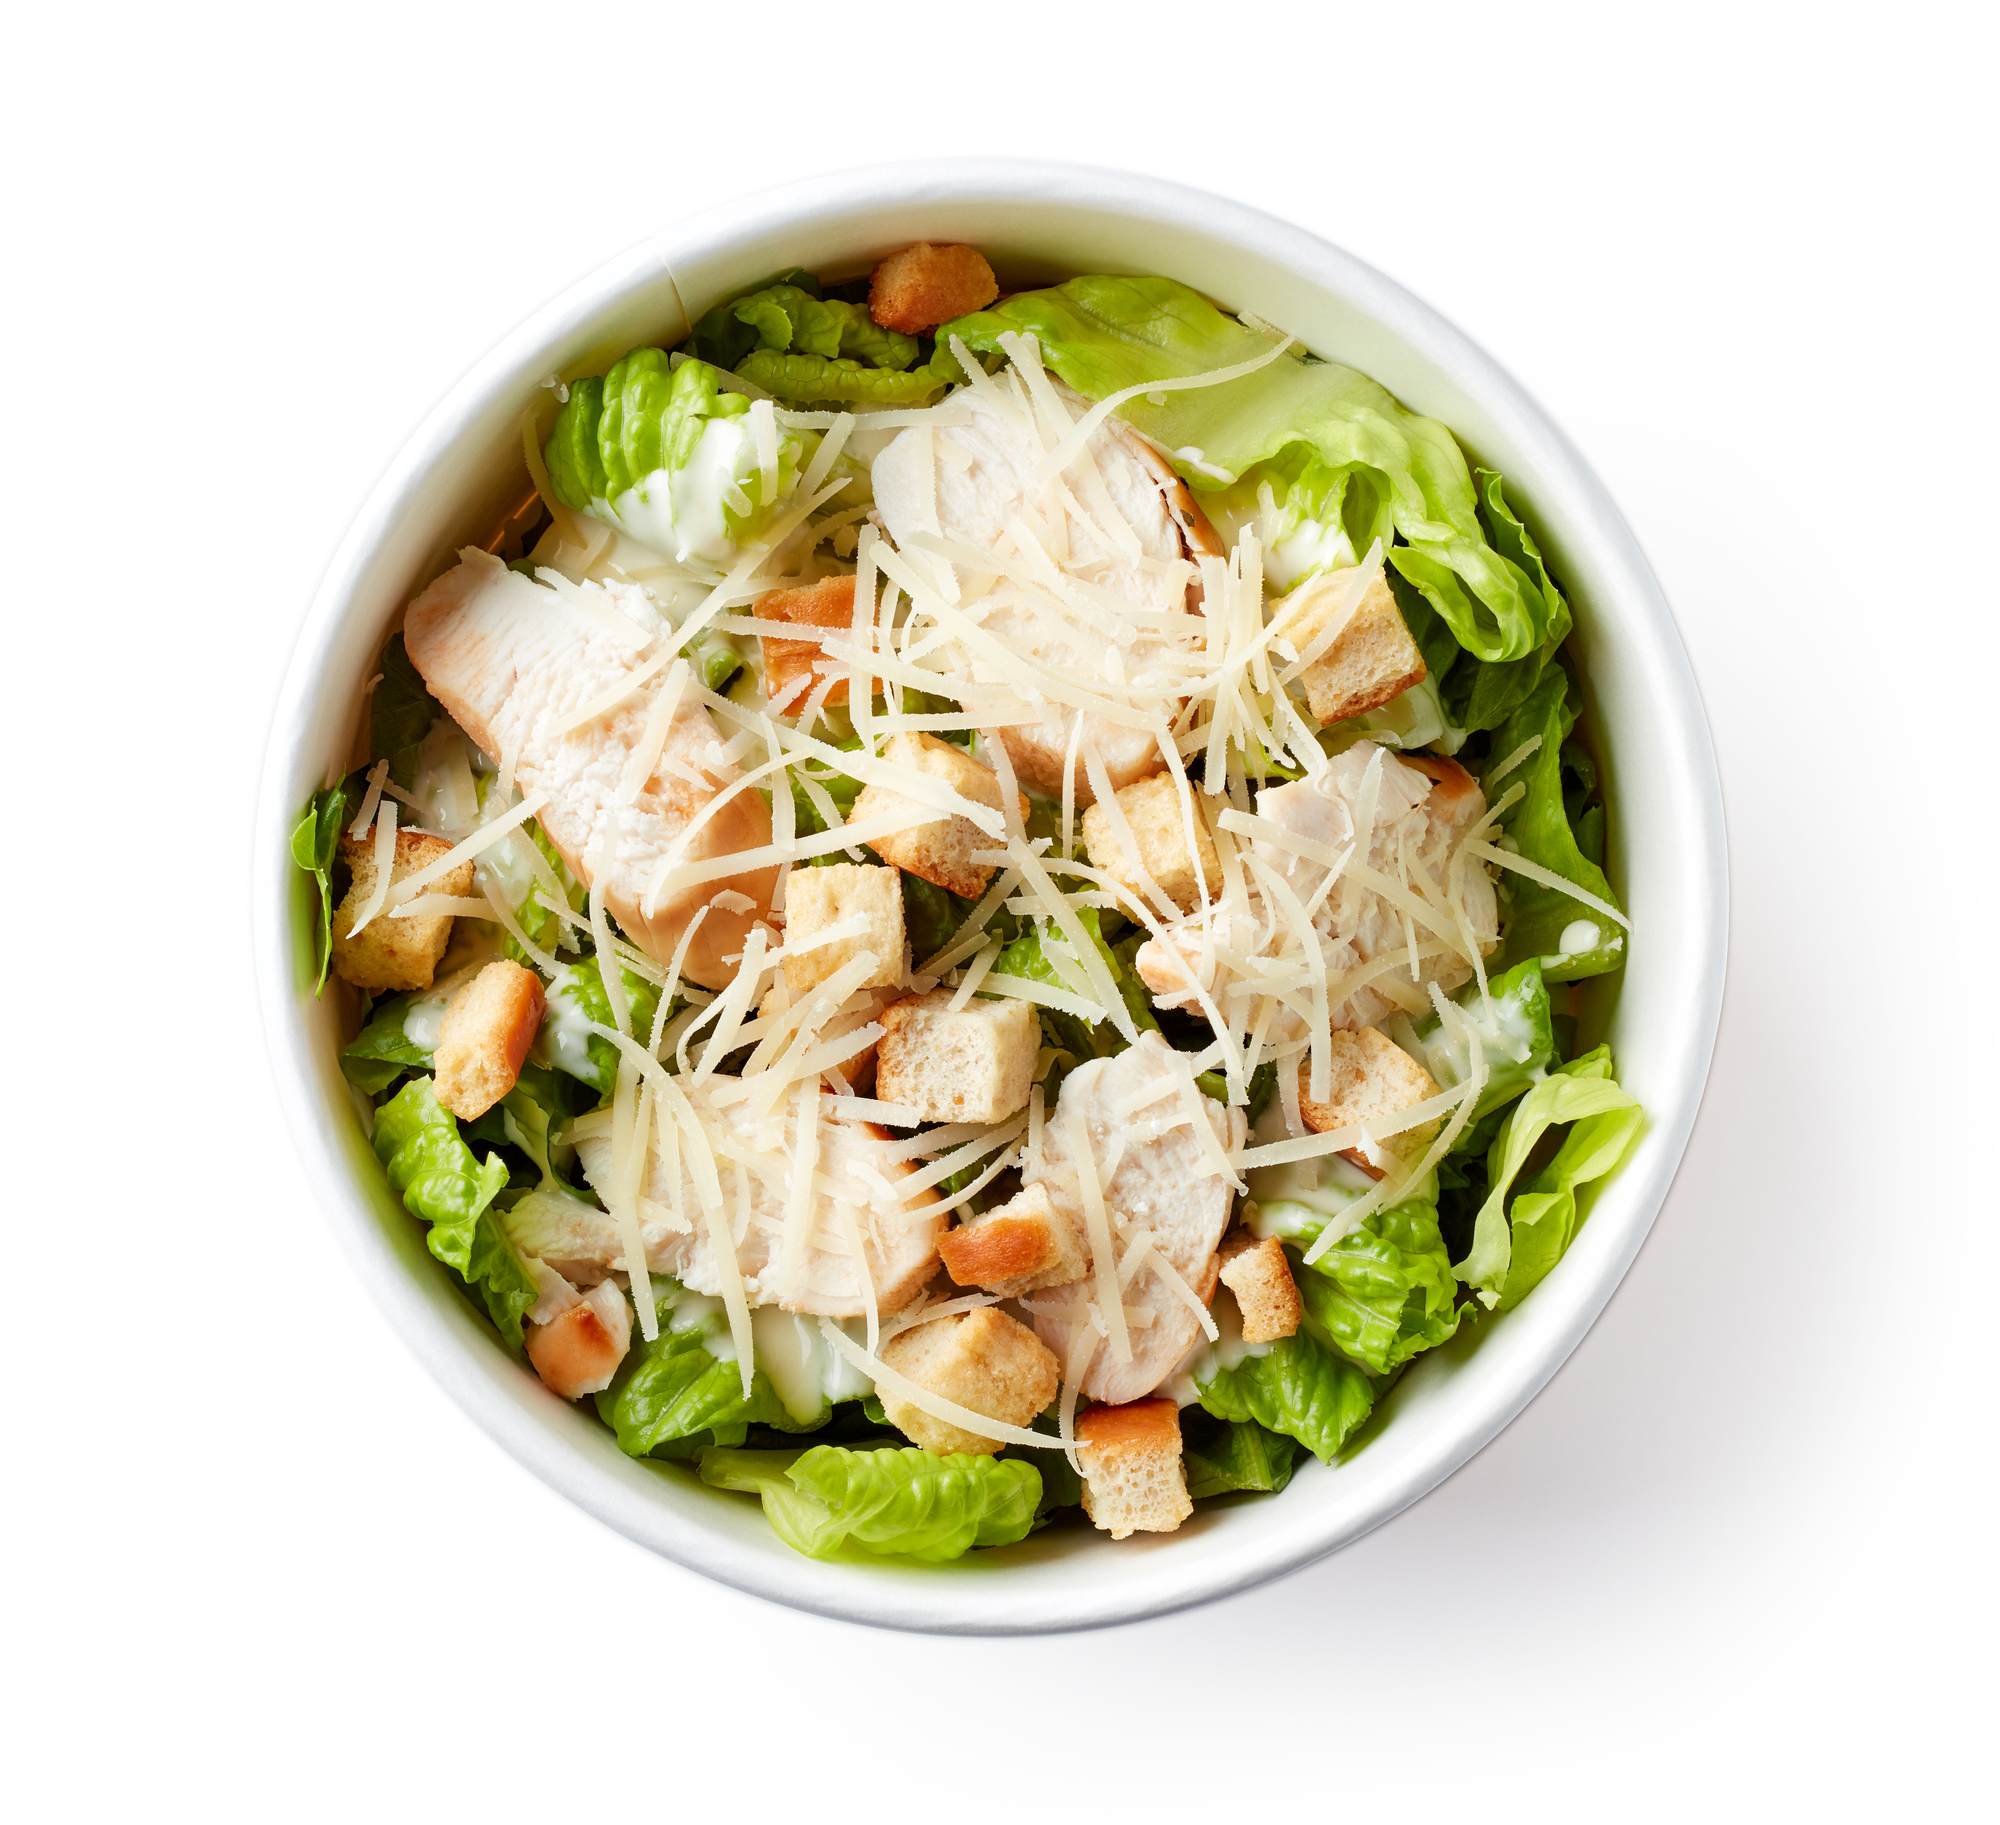 Caesar salad in paper bowl for take away, isolated on white background, top view